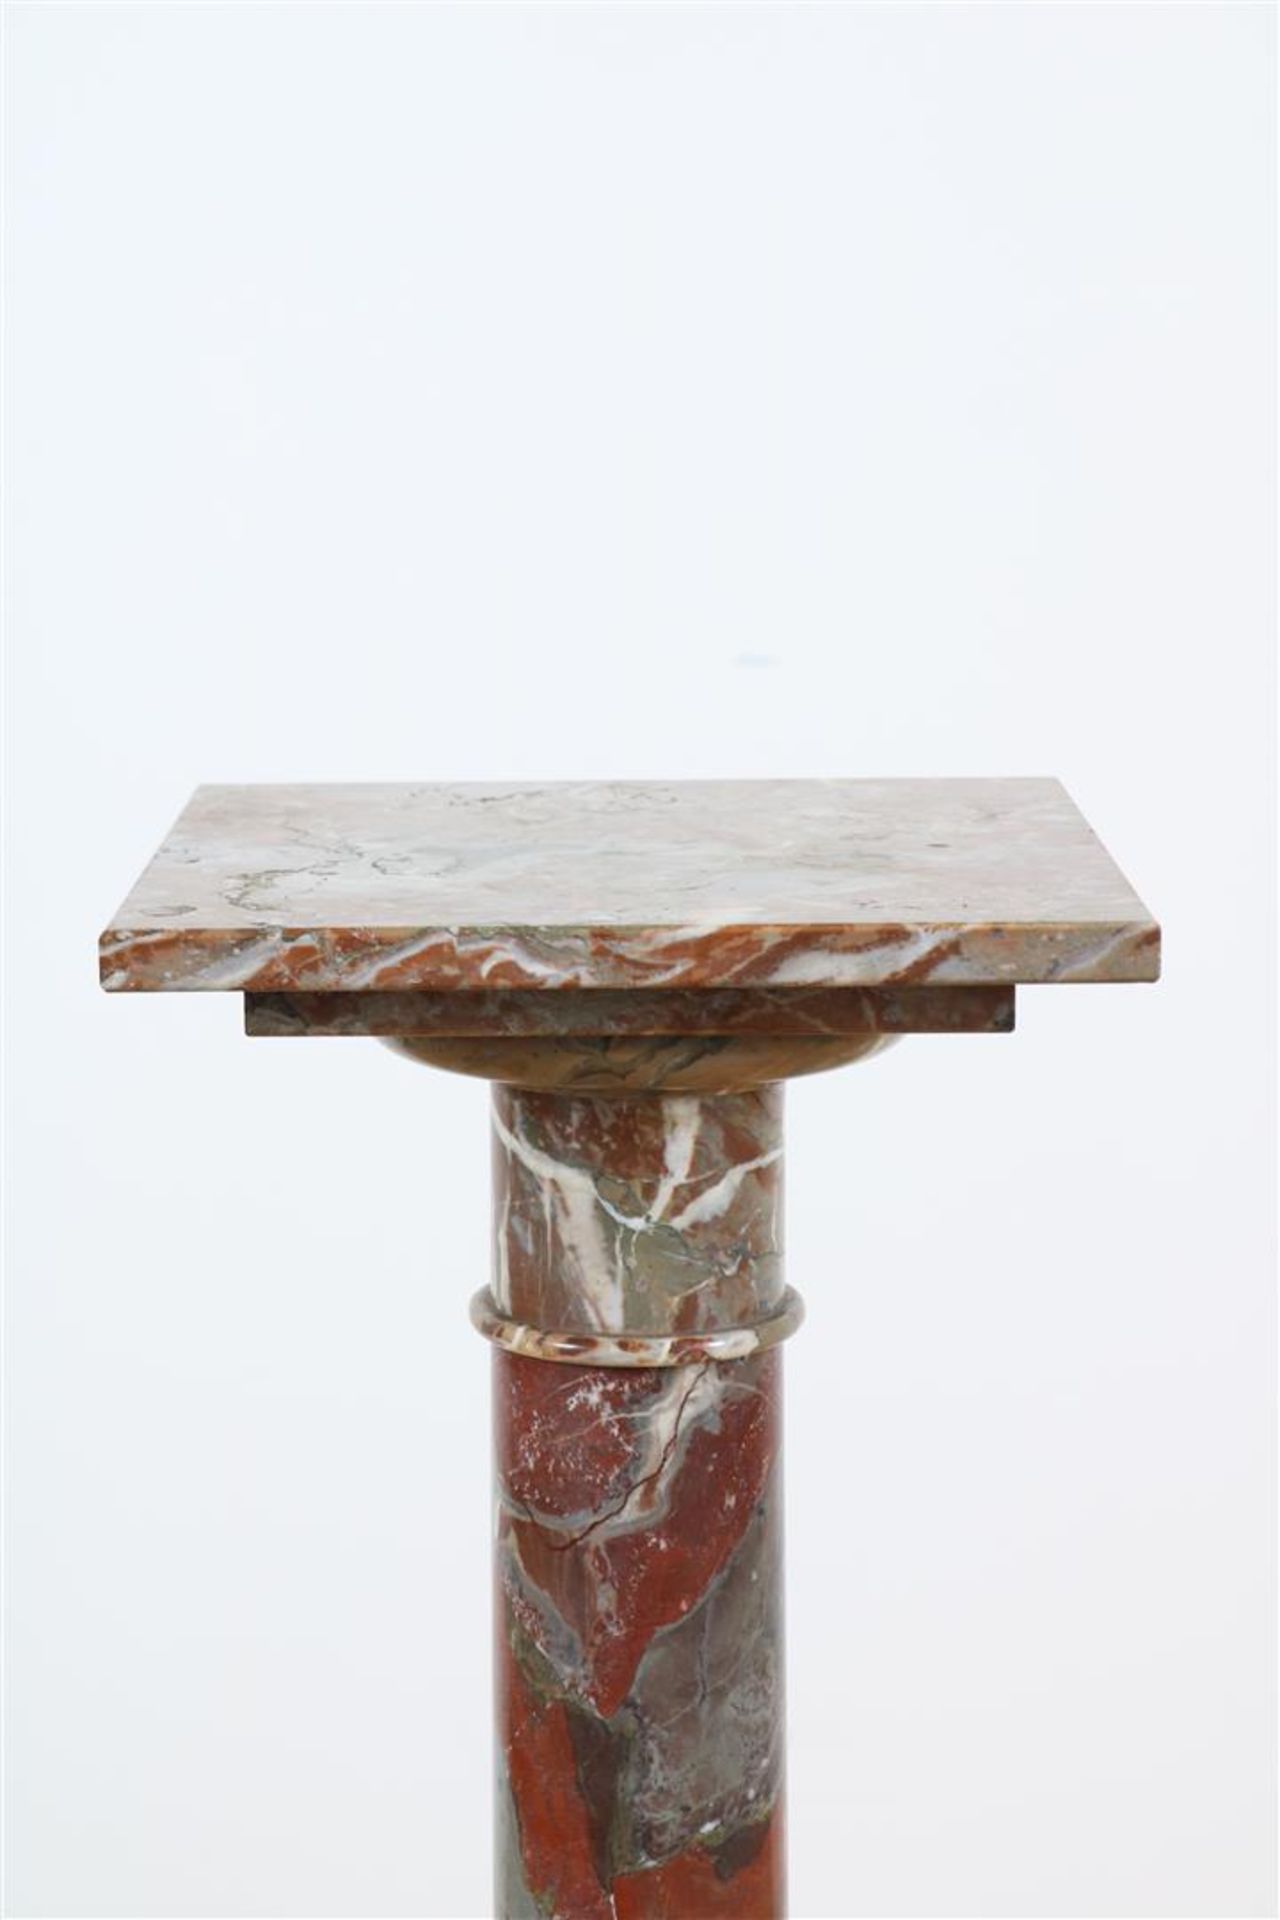 Red marble veined pedestals, with removable top, late 19th century, height 108 cm. - Image 2 of 5